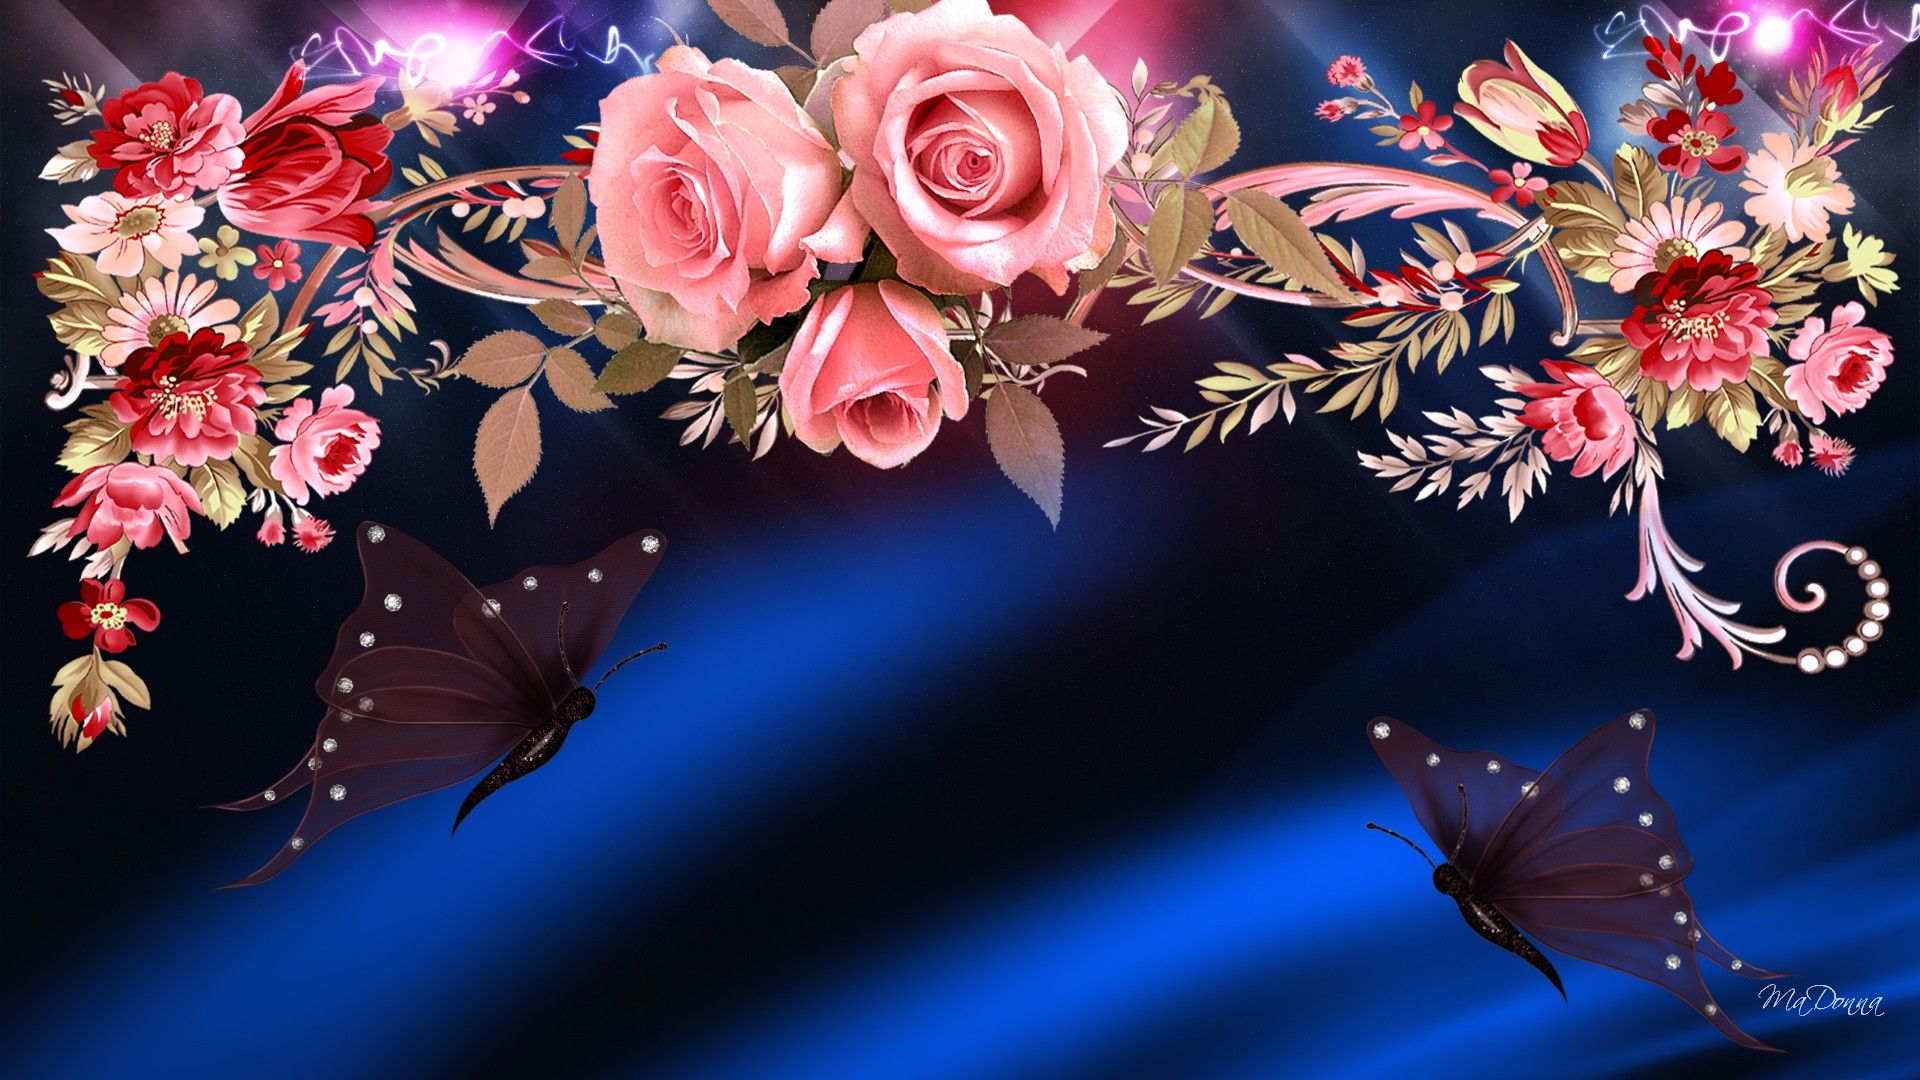 Unicorns Rainbows And Butterflies Background HD Of Roses